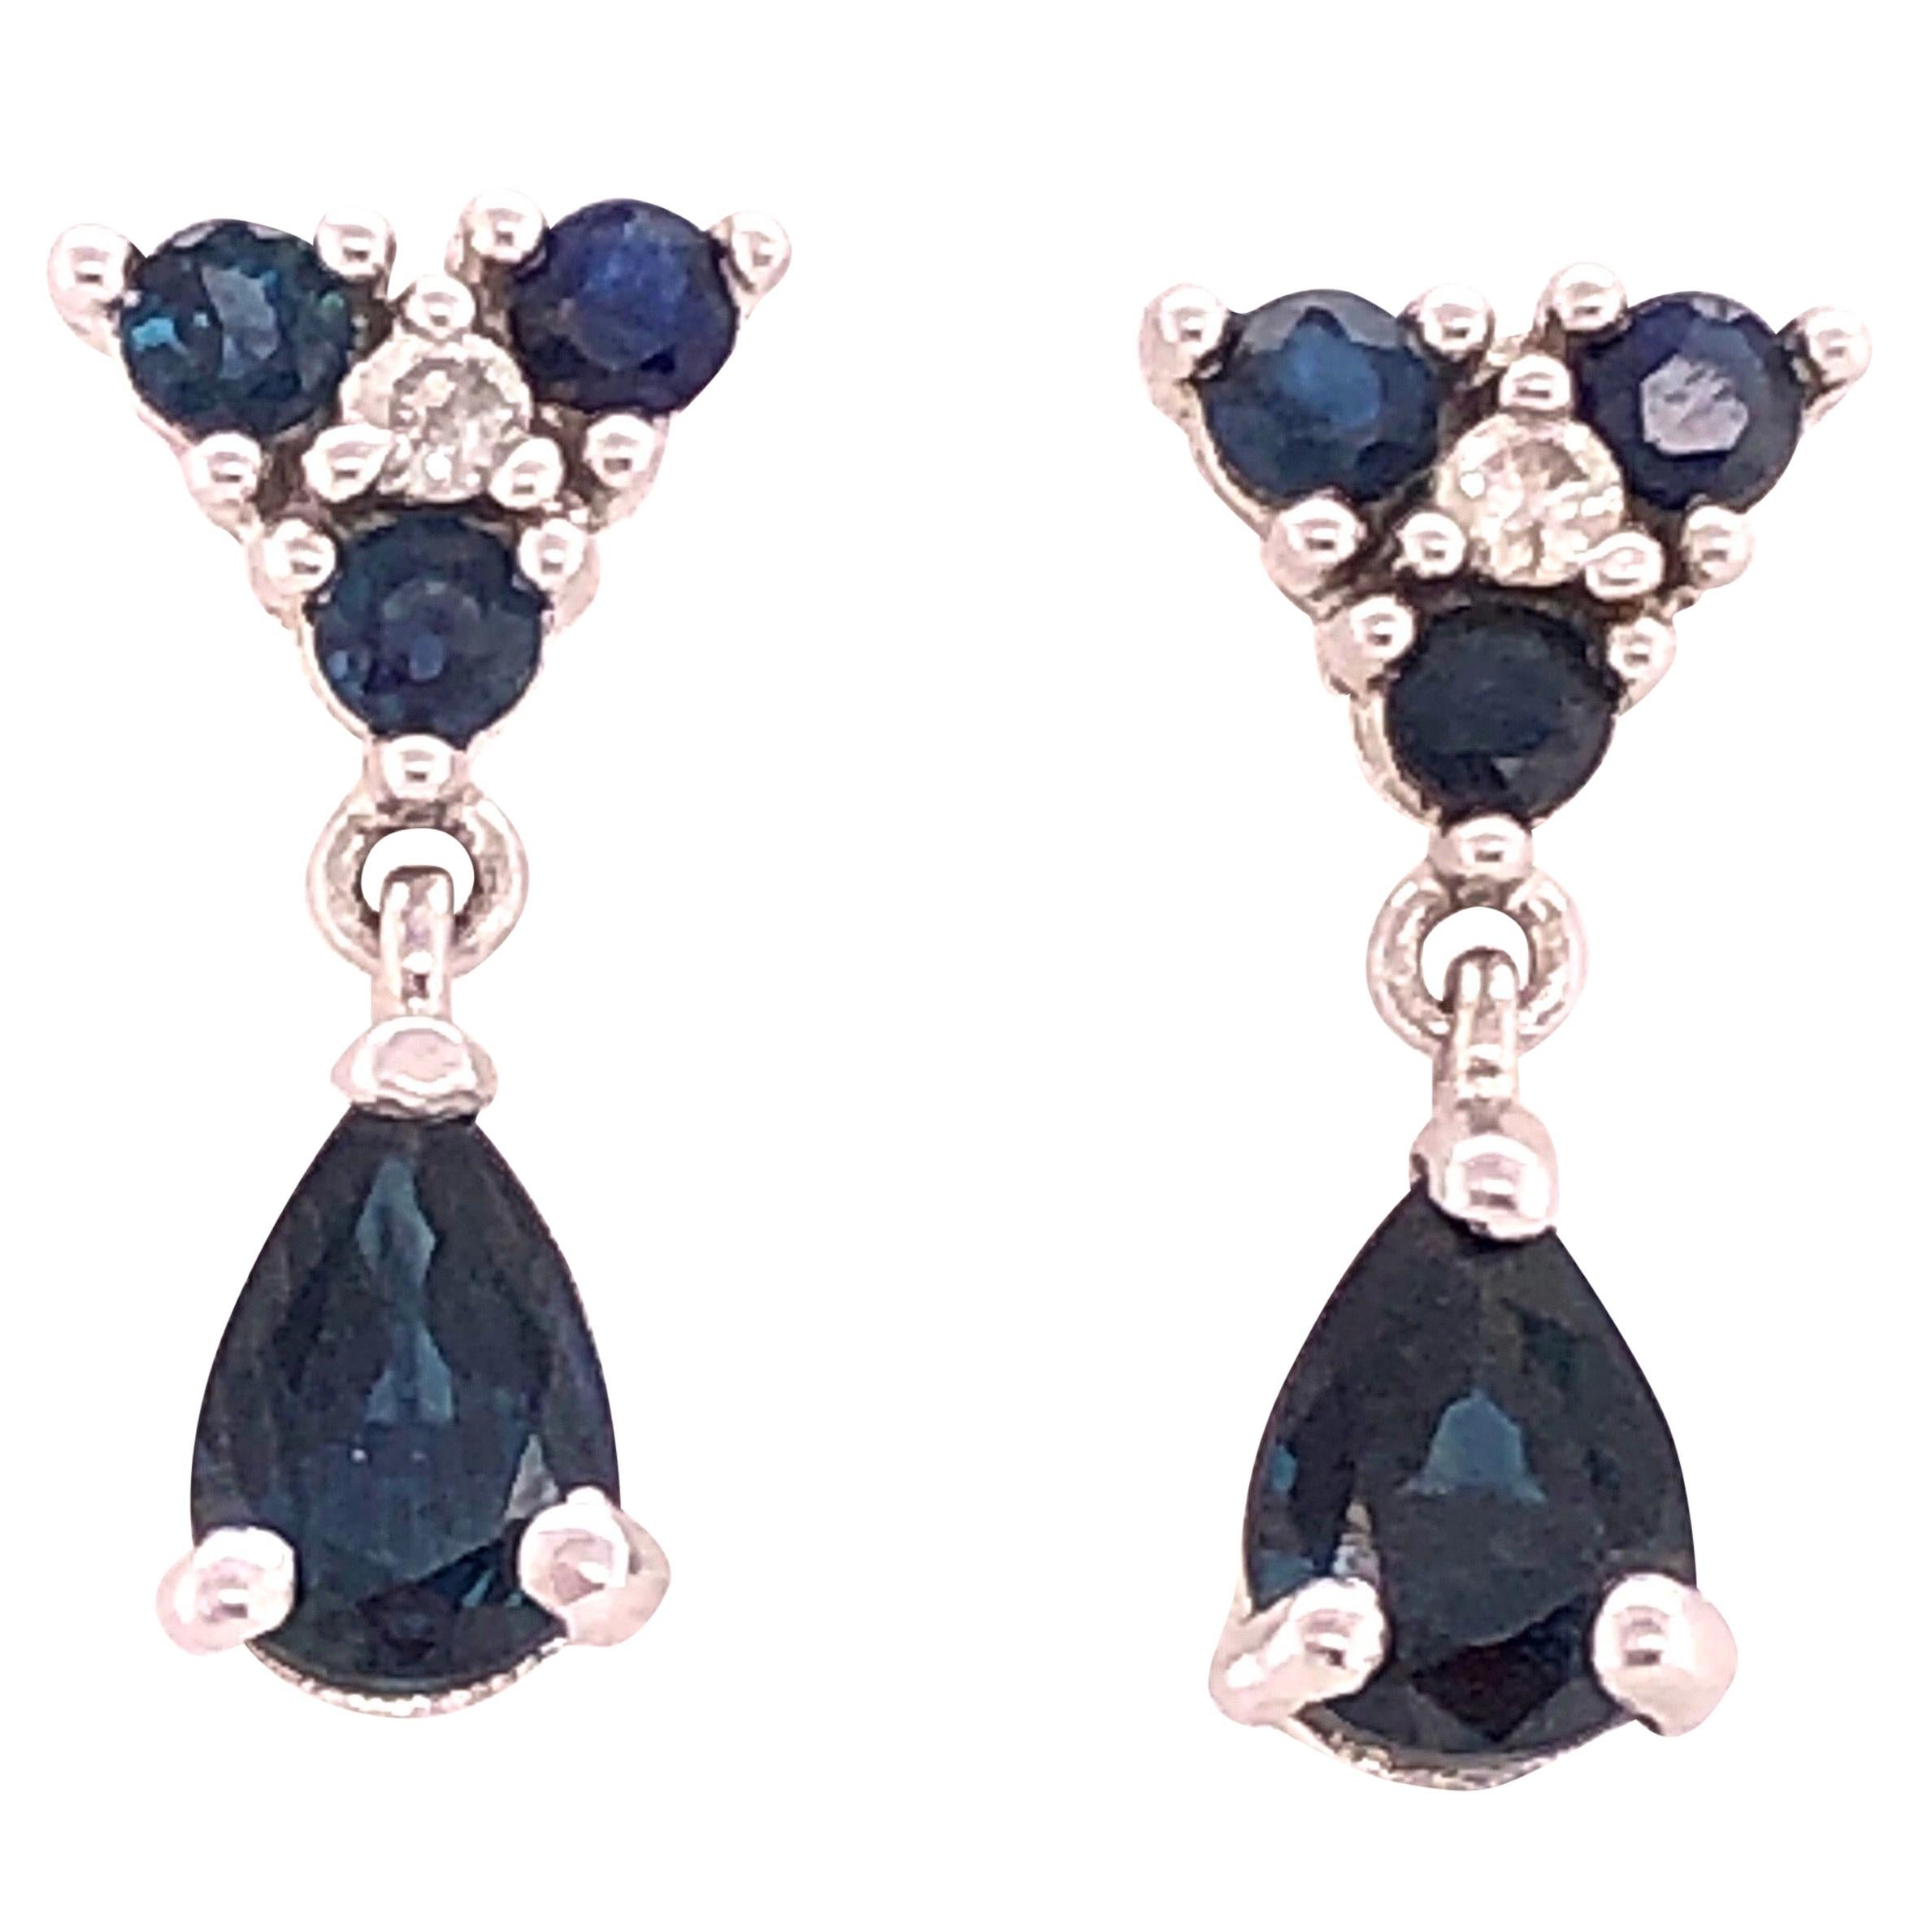 14 Karat White Gold and Blue Sapphire Drop Earrings 0.02 Total Diamond Weight